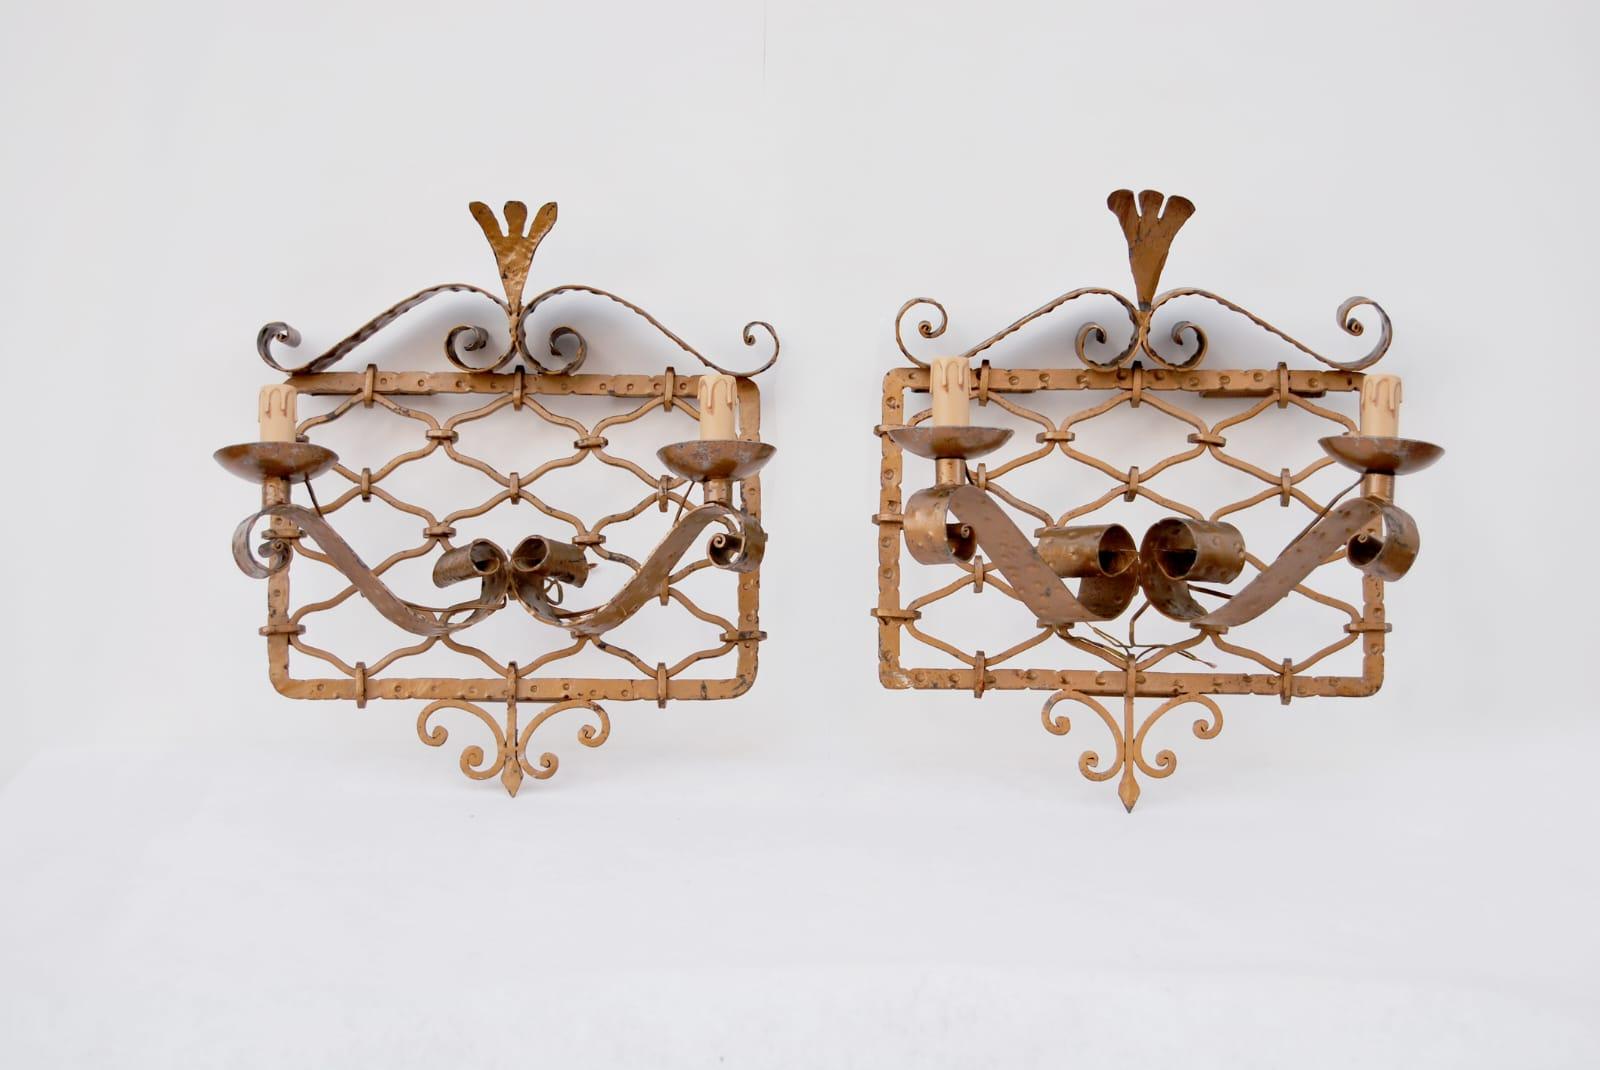 Pair of gilded wrought iron wall sconces, 1950s, Made in Italy. 
Wall sconces in the style of Pierluigi Colli made of gilded wrought iron, completely handcrafted. The rhomboid-shaped inner forms hold each other by iron clamps. The fans that cover